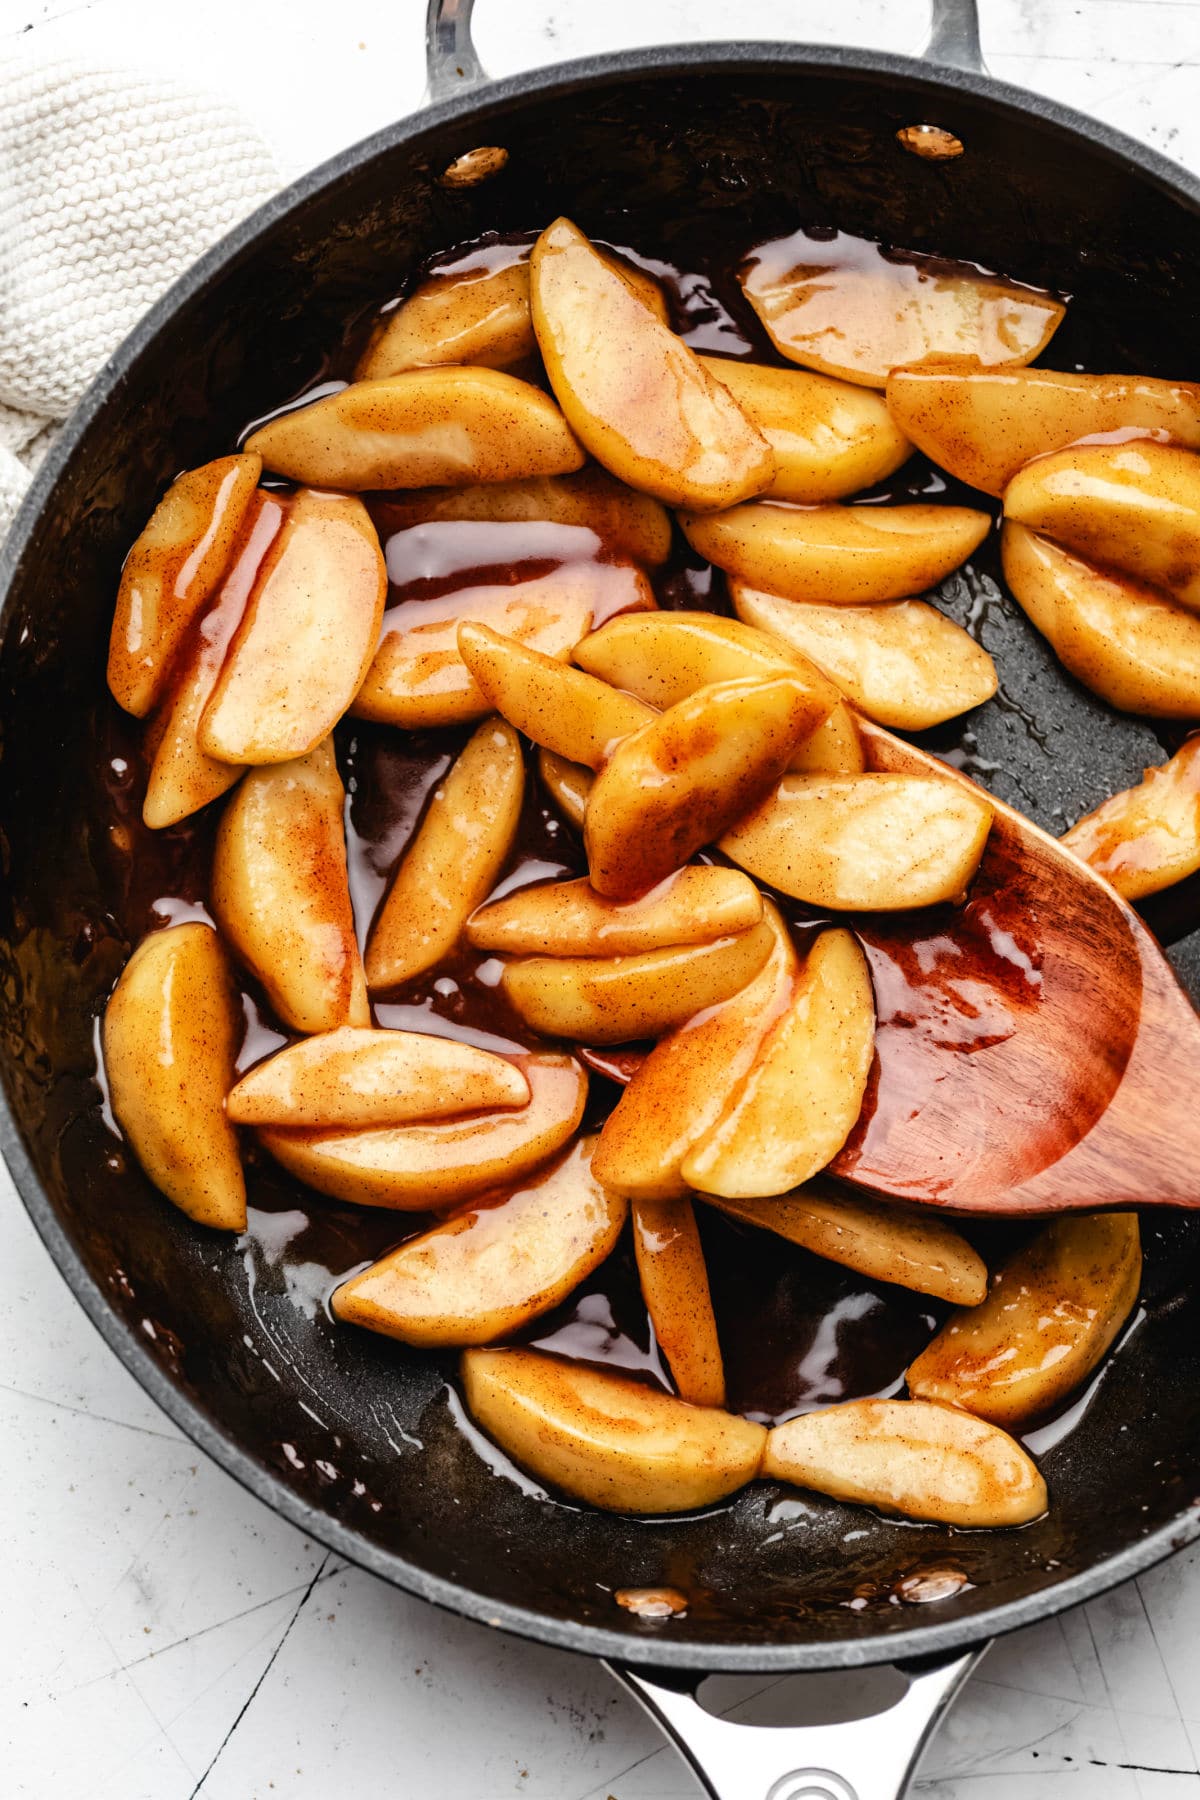 Sauteed cinnamon apples in a cast iron skillet.